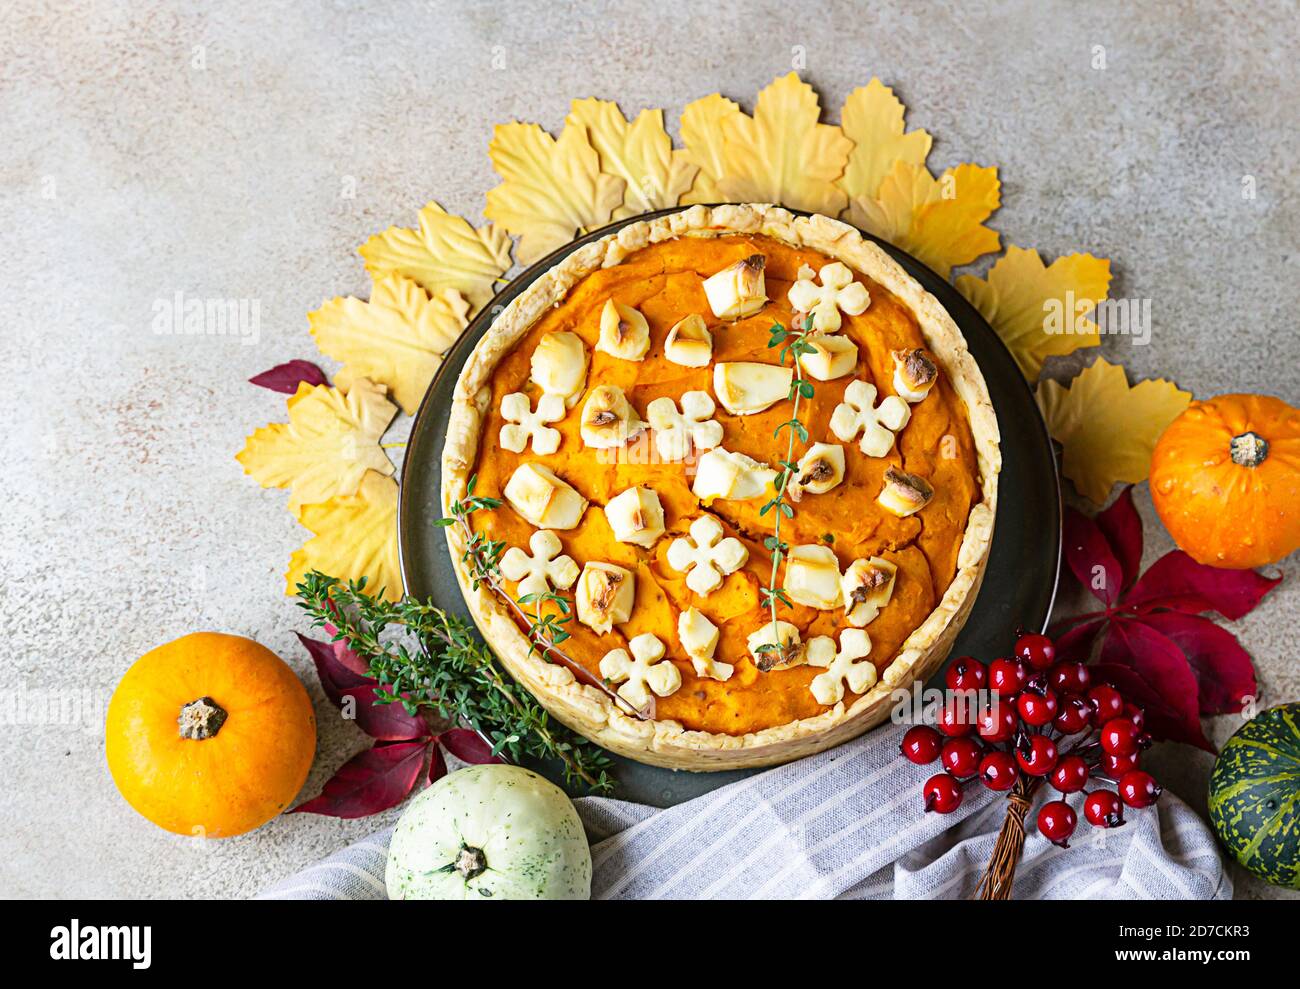 Top view of pumpkin tart or pie with feta cheese and thyme. Fall season concept. Cozy autumn food background. Stock Photo